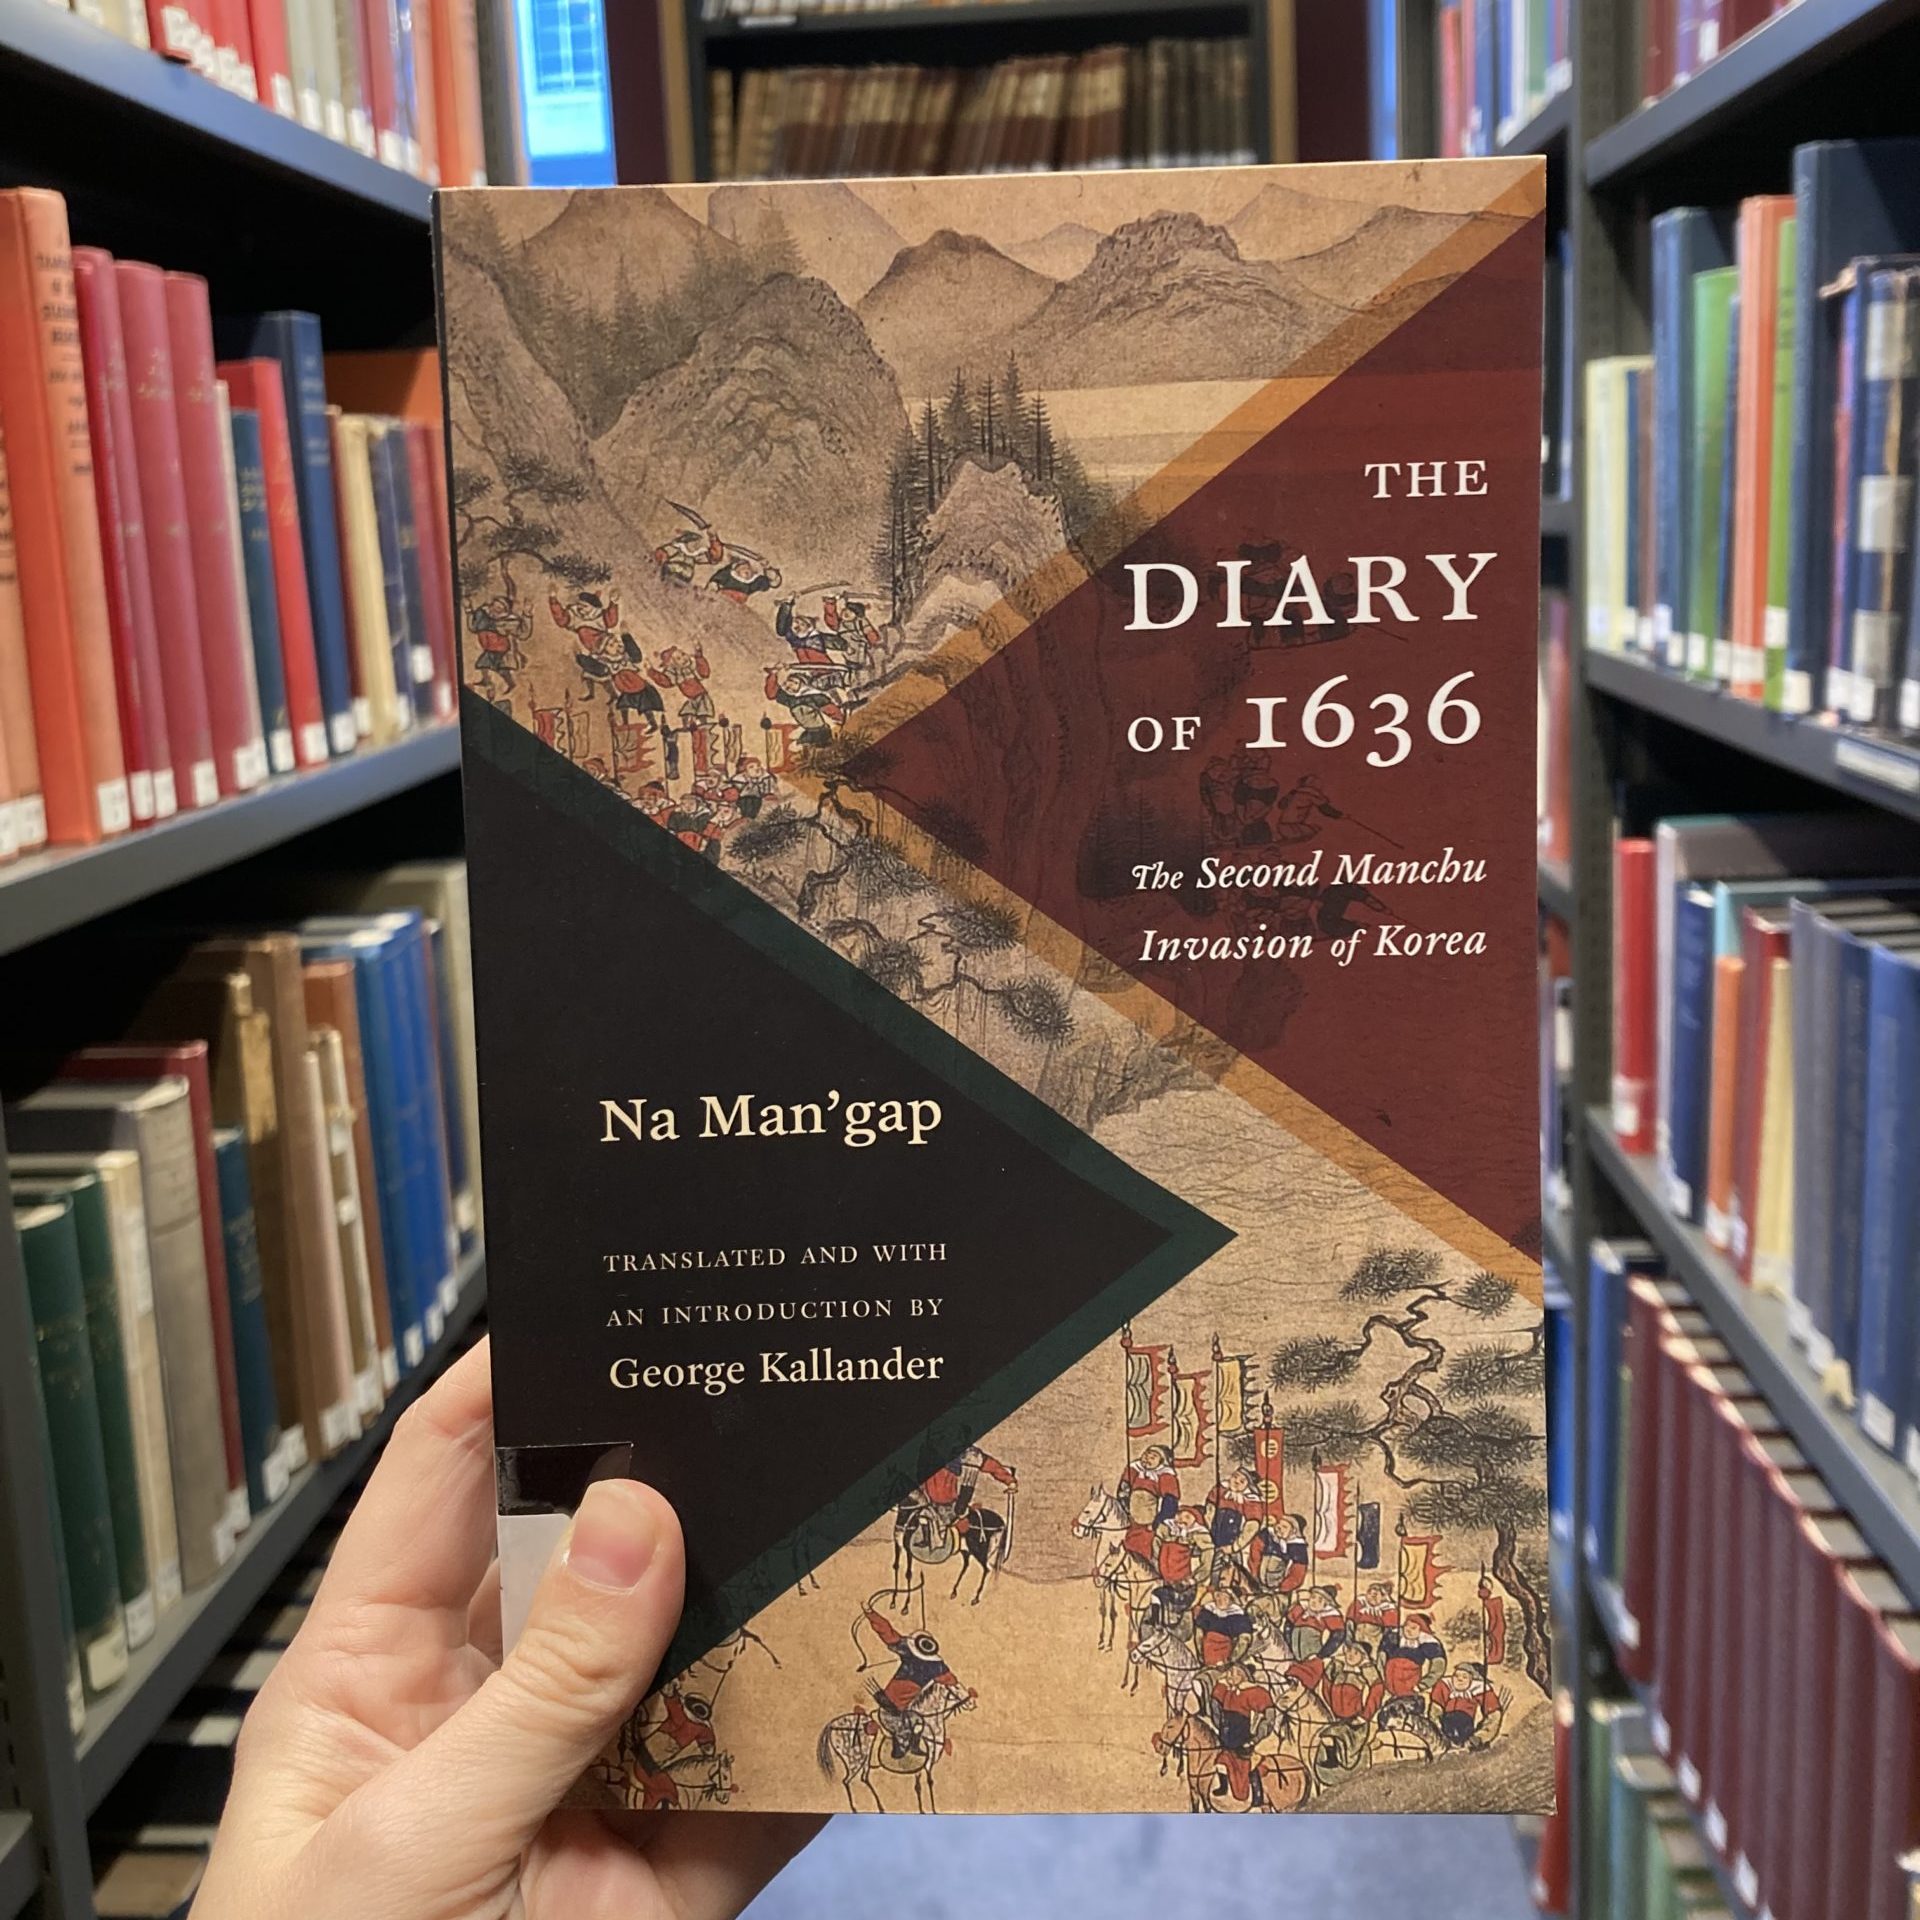 A view of the front cover of 'The Diary of 1636: The second Manchu invasion of Korea' being held up in between two bookcases